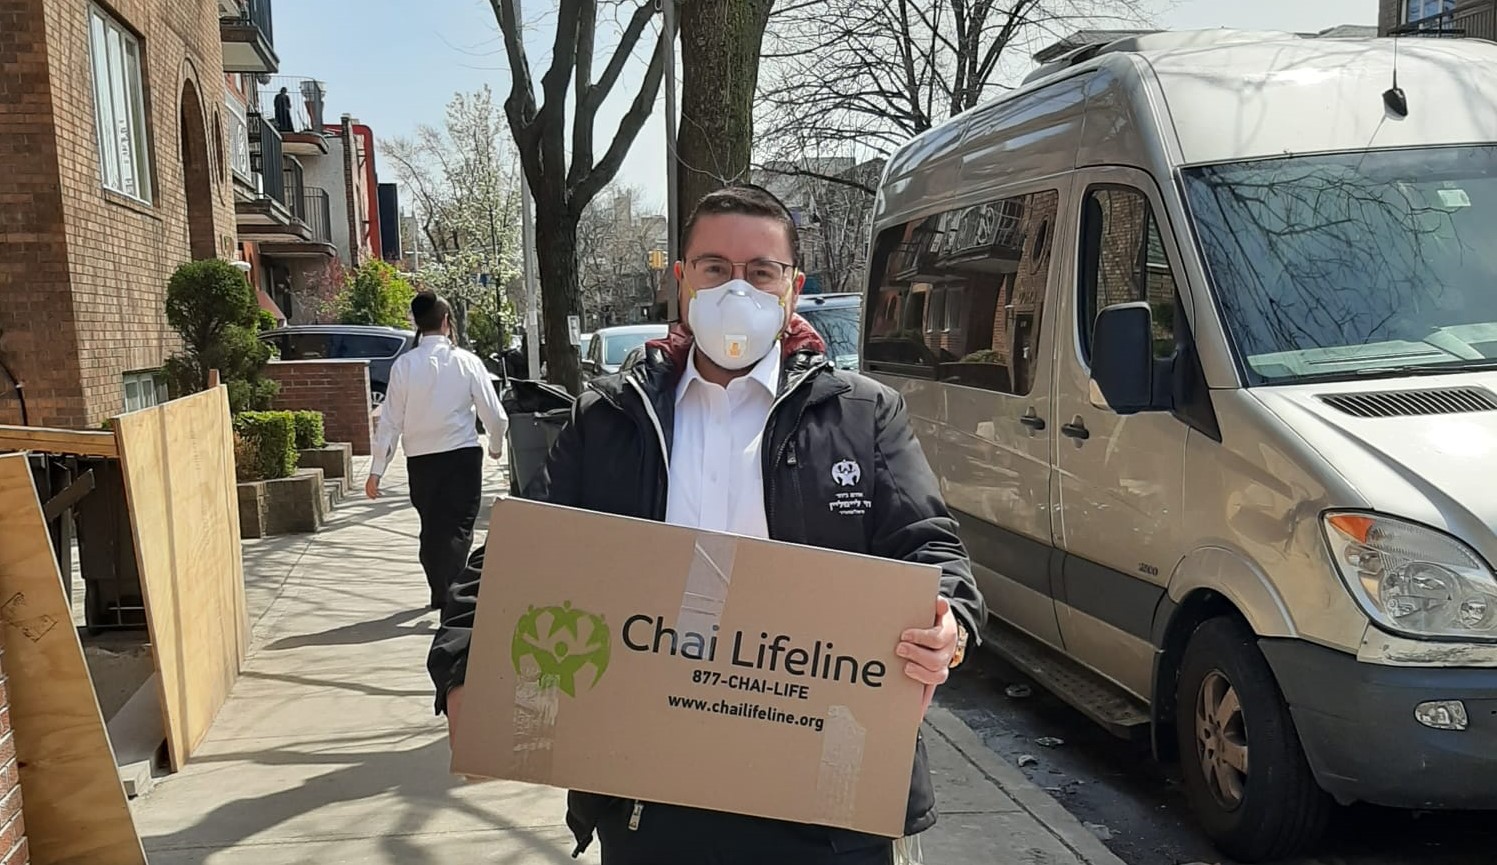 Volunteers with Chai Lifeline deliver boxes of kosher-for-Passover food to young children and their families who will spend the holiday in the hospital, April 2022. Credit: Courtesy.